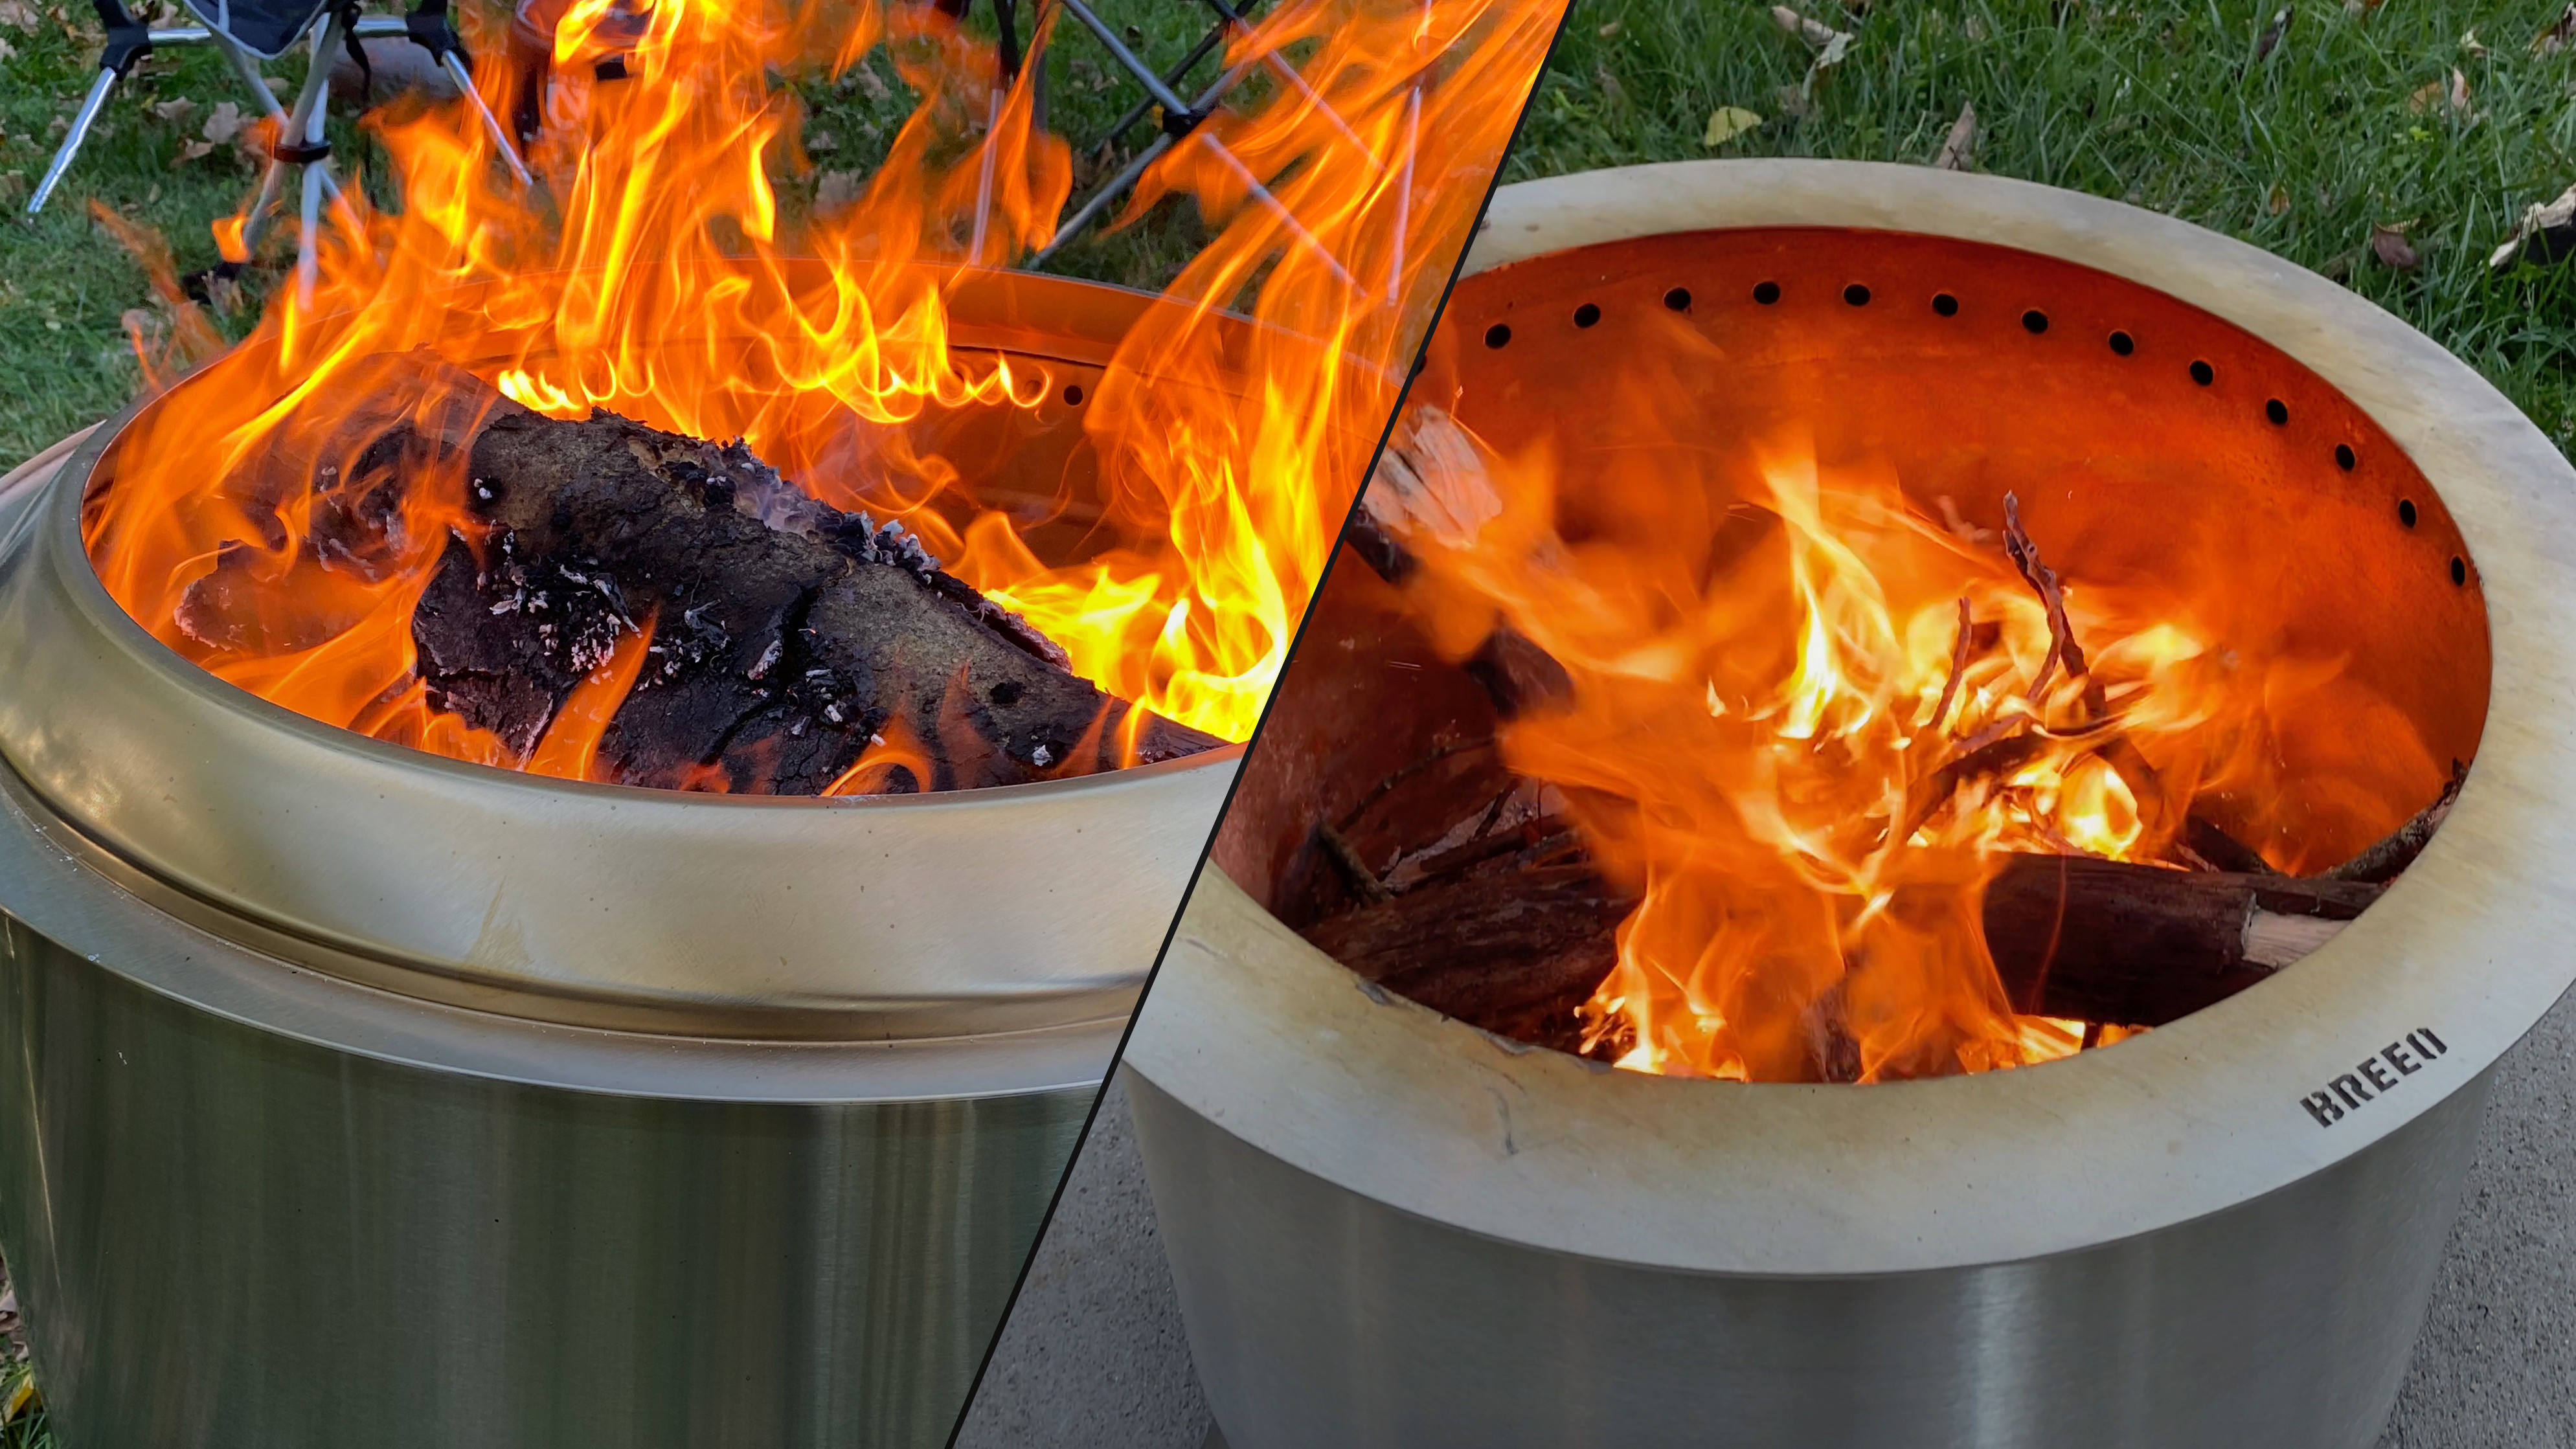 Solo Stove Vs Breeo What S The Best, Smokeless Fire Pit Reviews